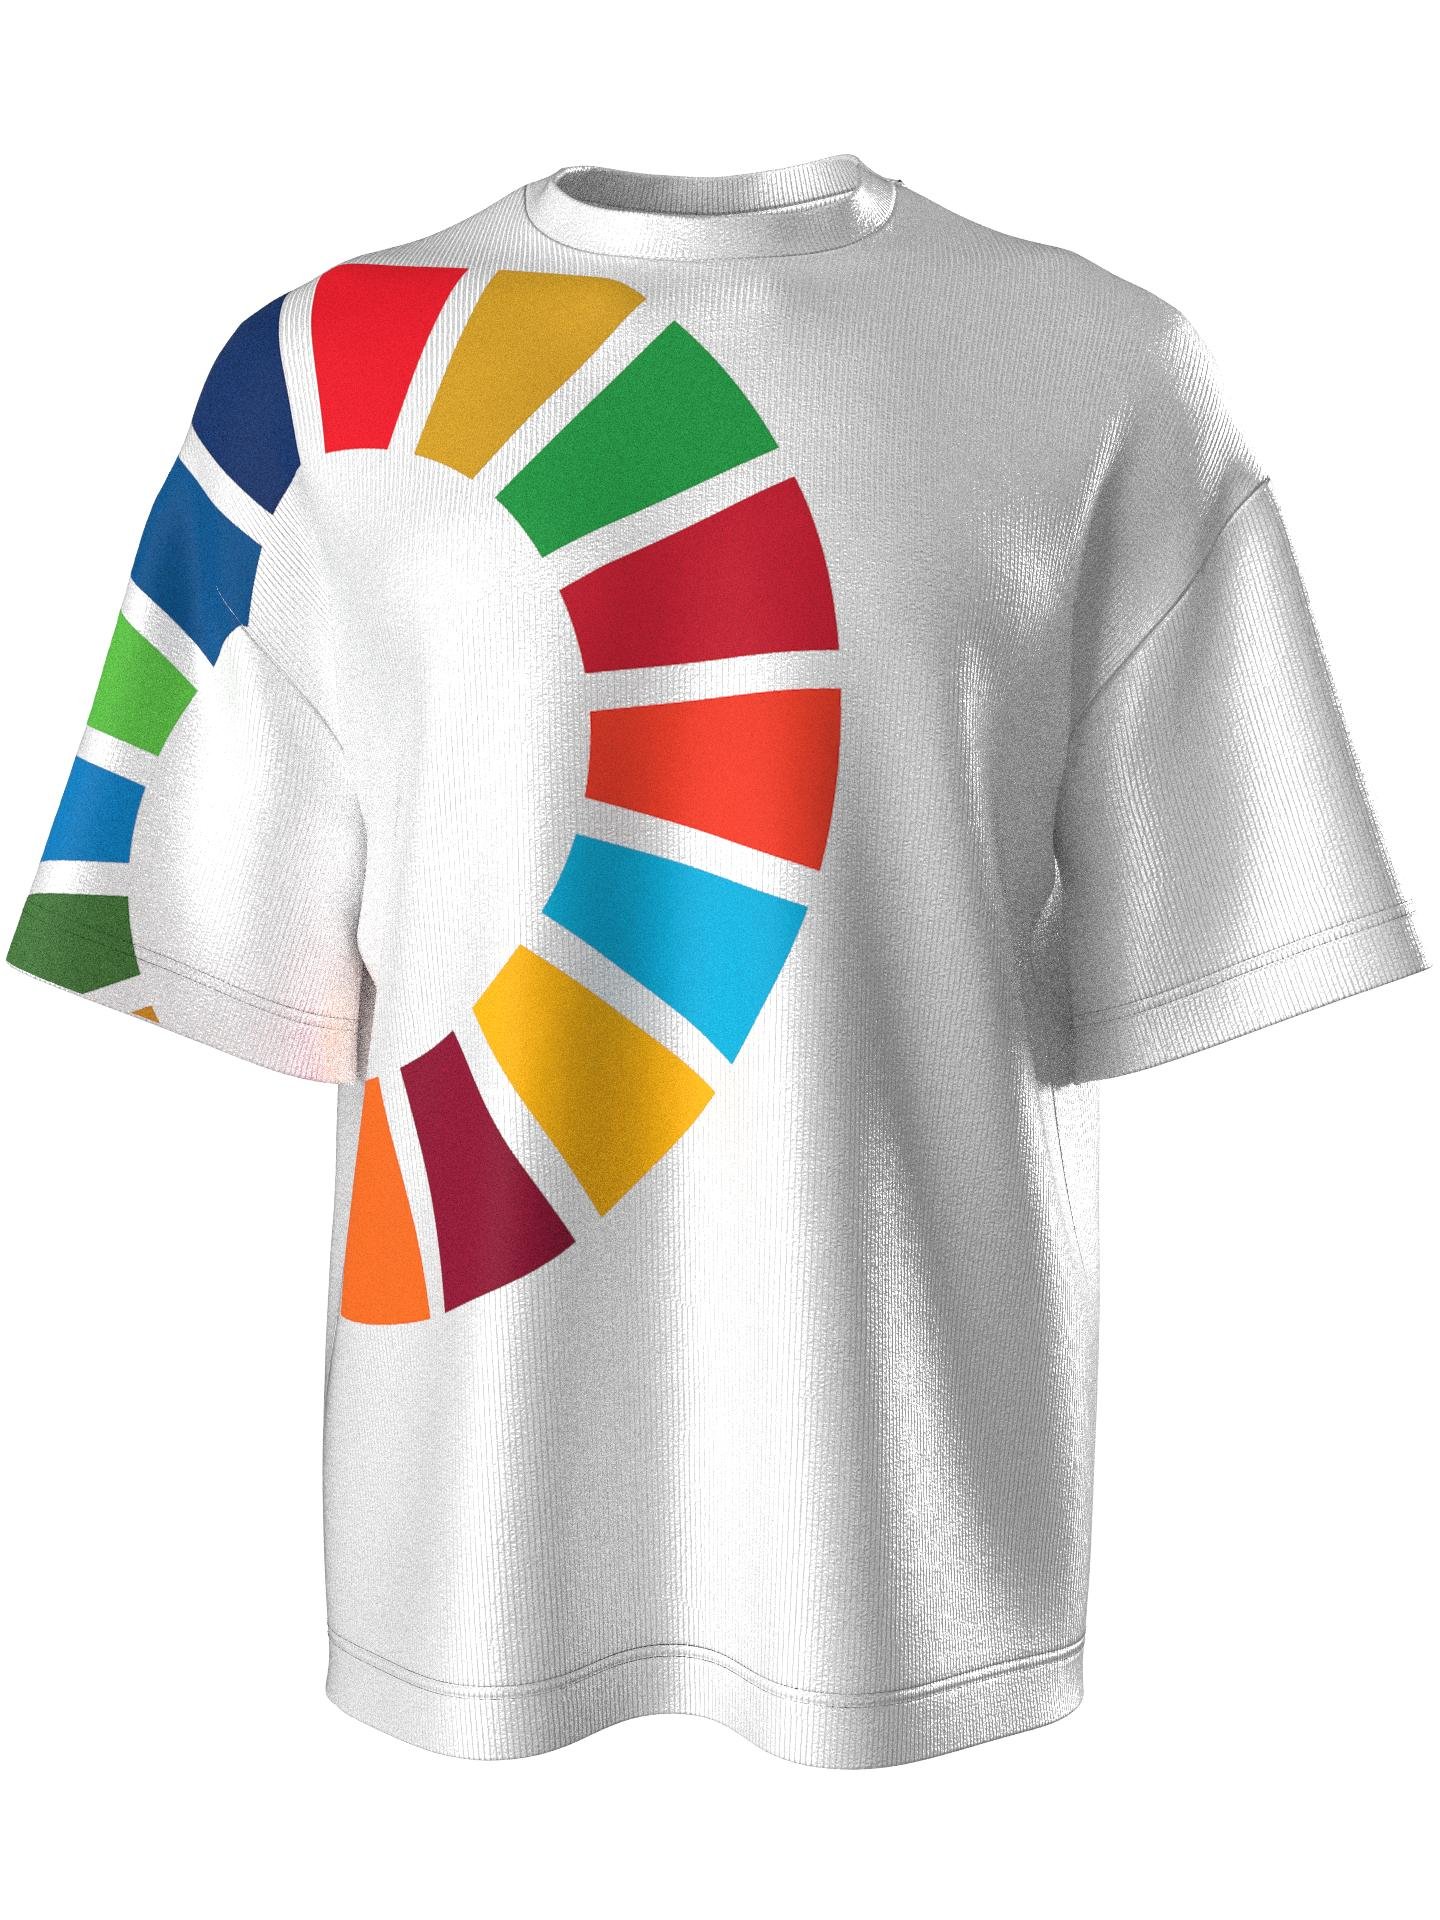 T-shirt with color wheel - white by SDGS INSPIRED COLLECTION